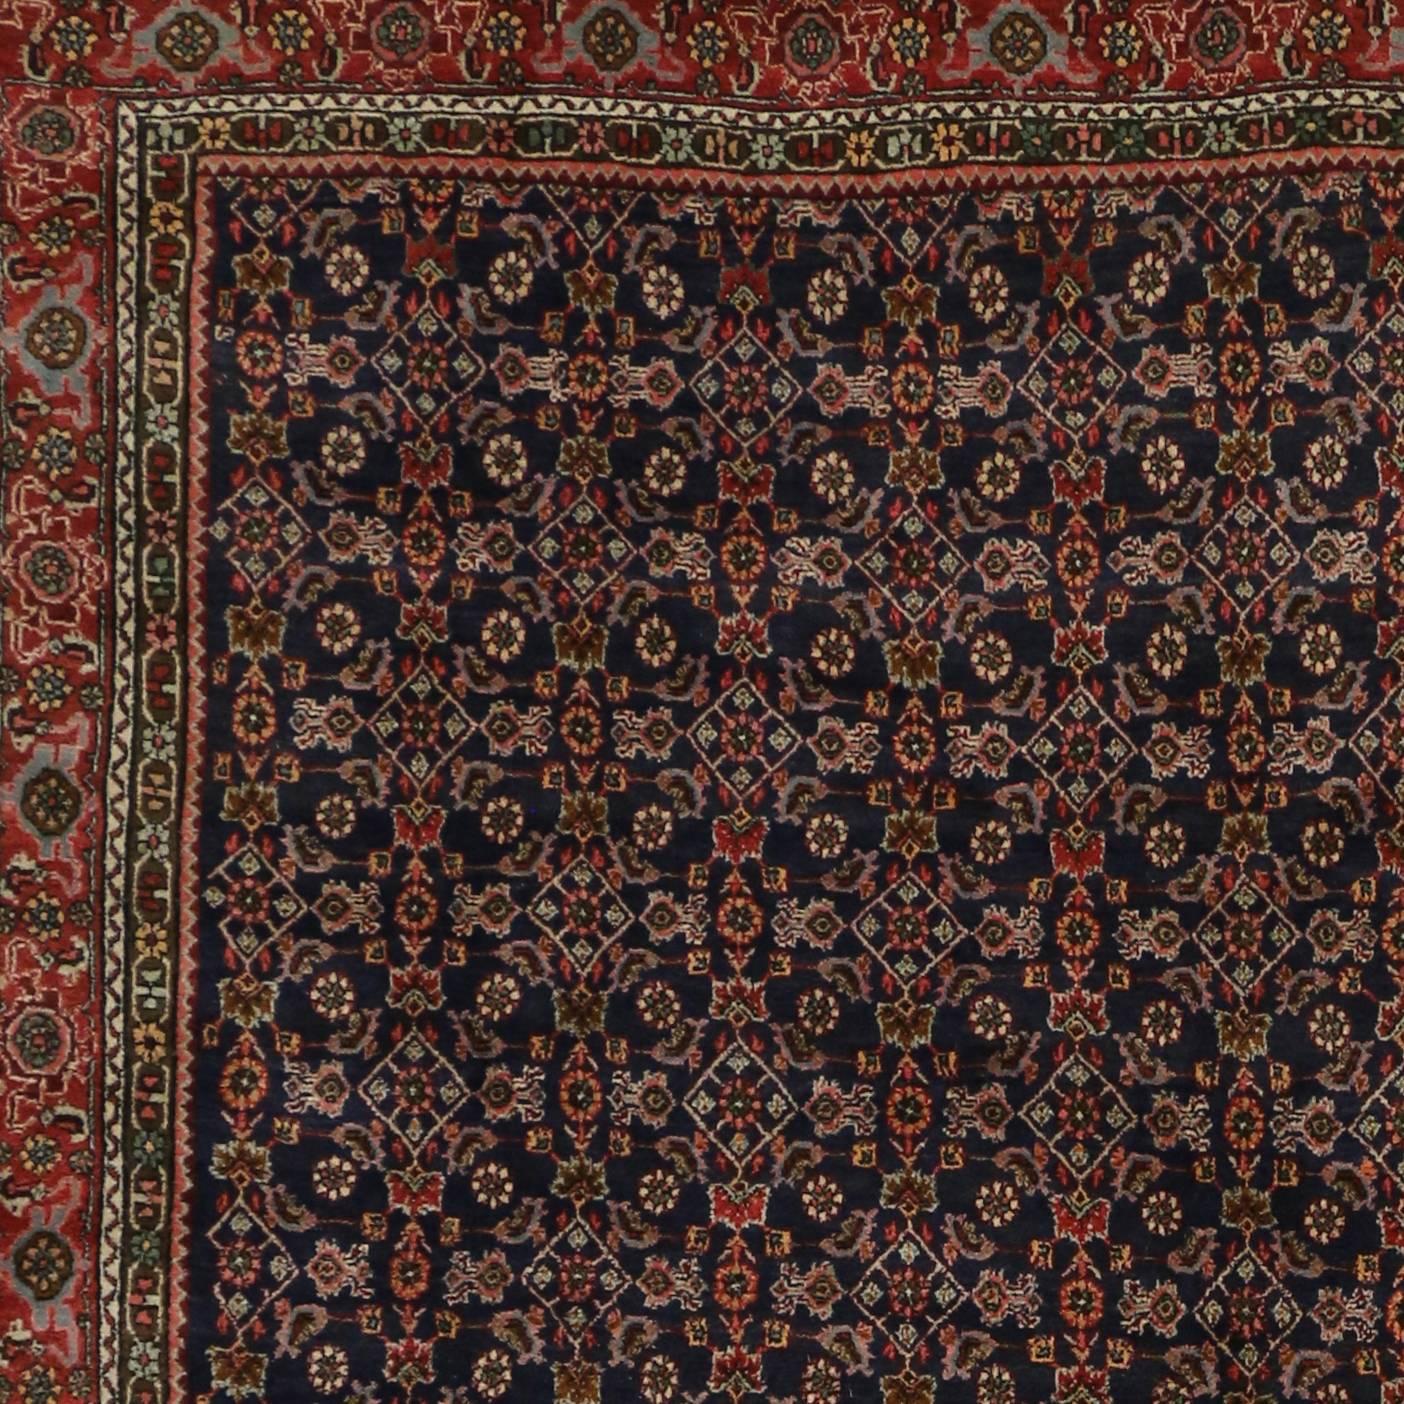 20th Century Antique Bijar Persian Rug with Modern Traditional Style, the Iron Rugs of Persia